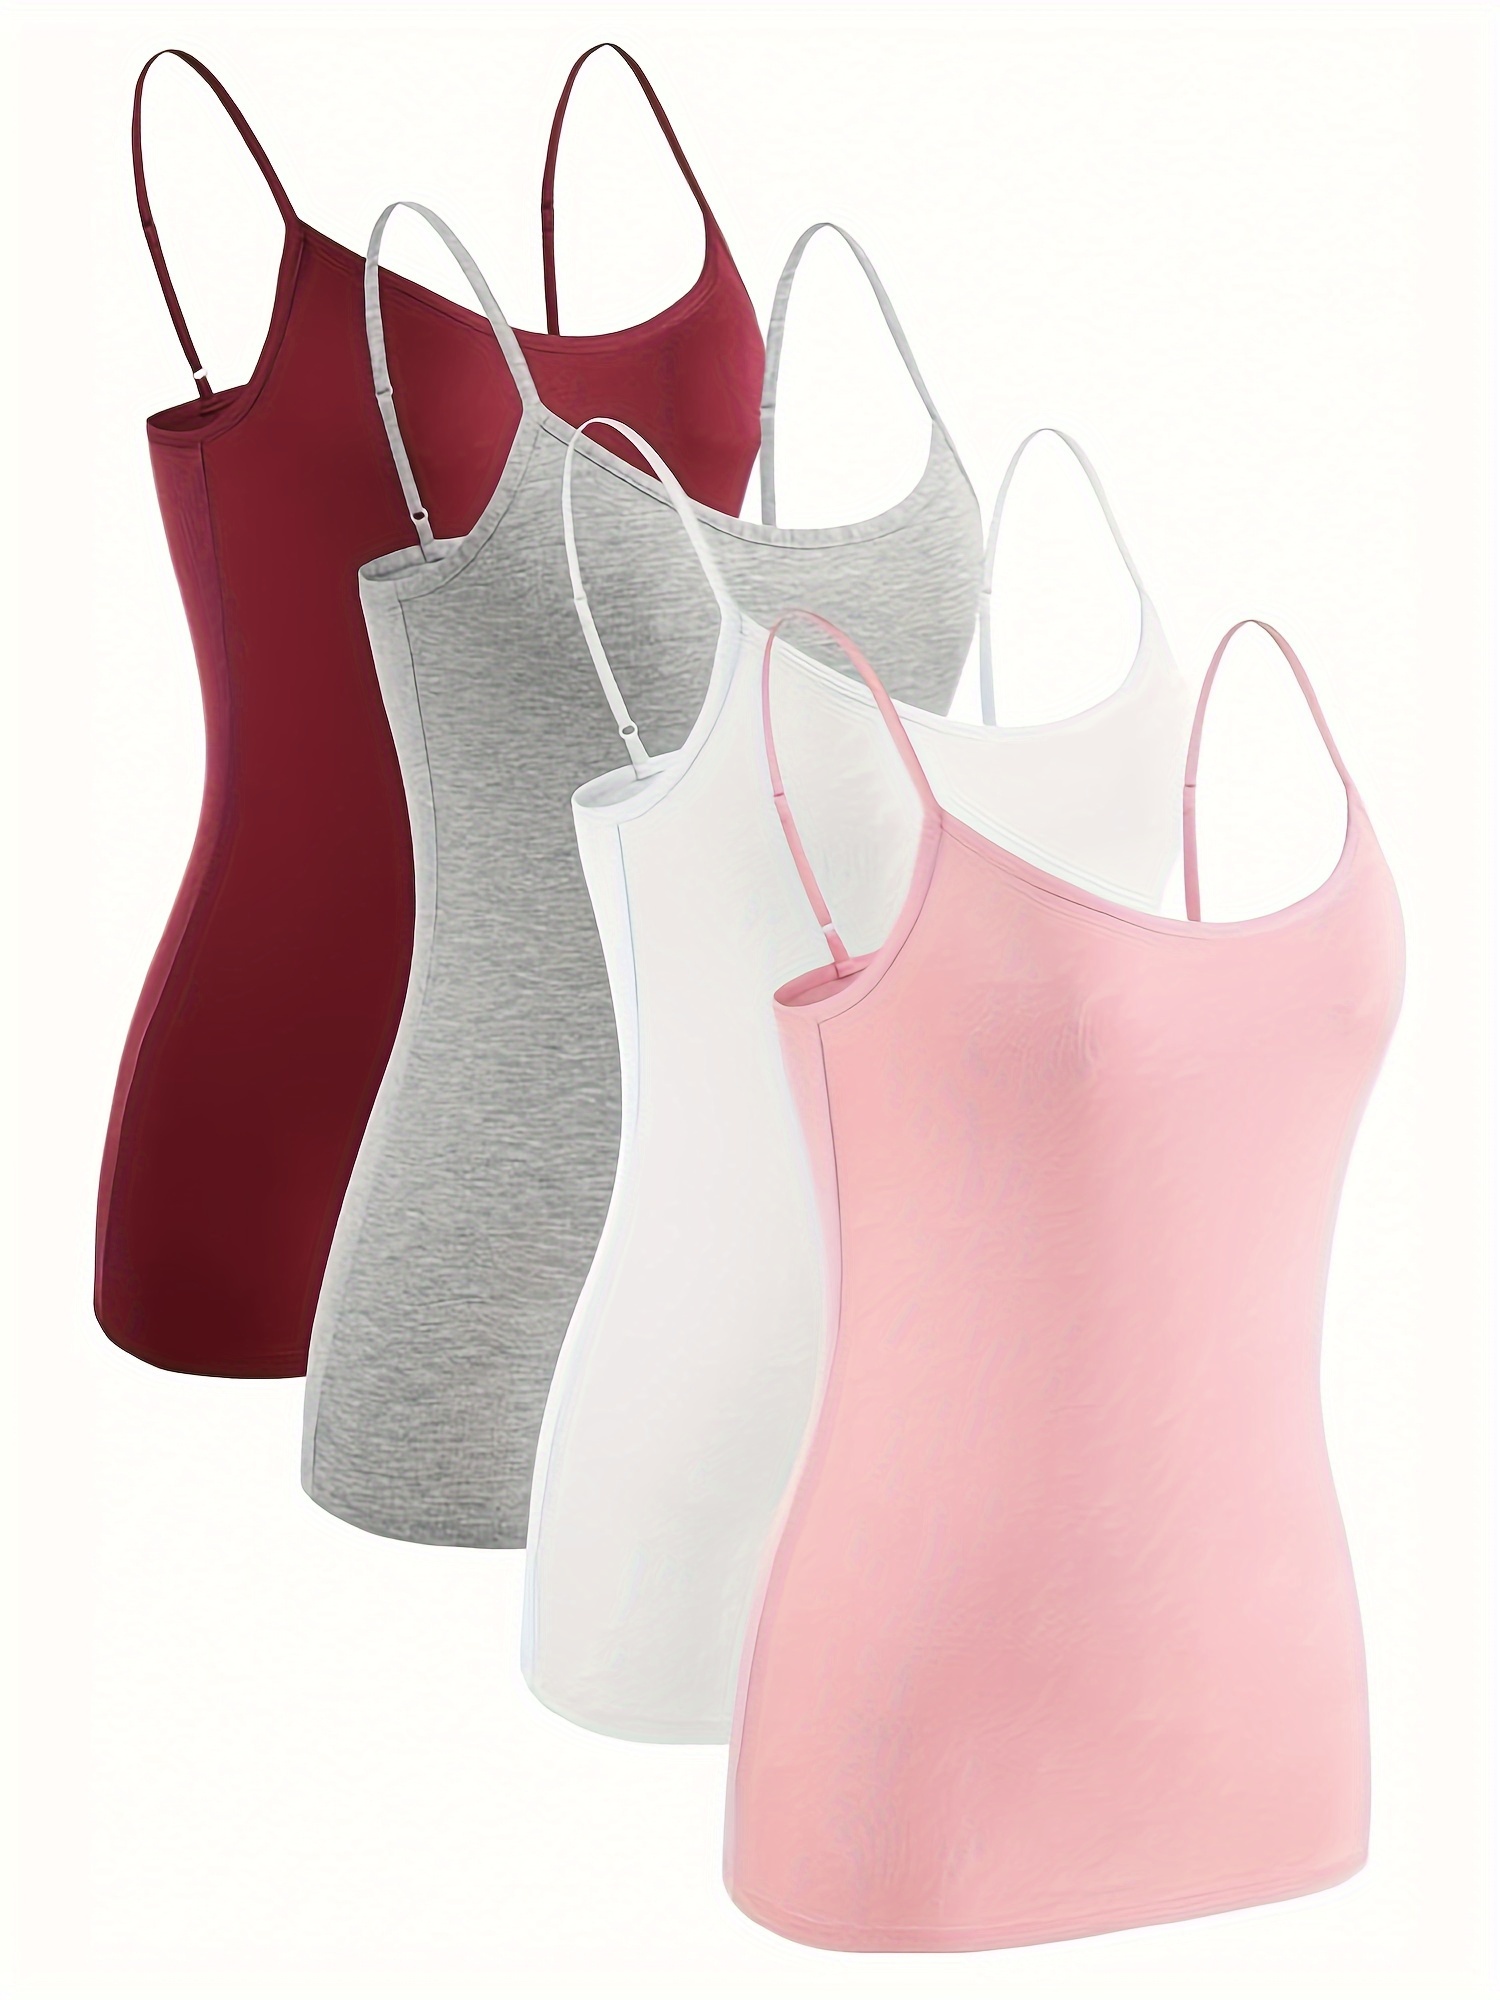 Women Solid Color Low-cut Top Adjustable Sleeveless Tank Tops